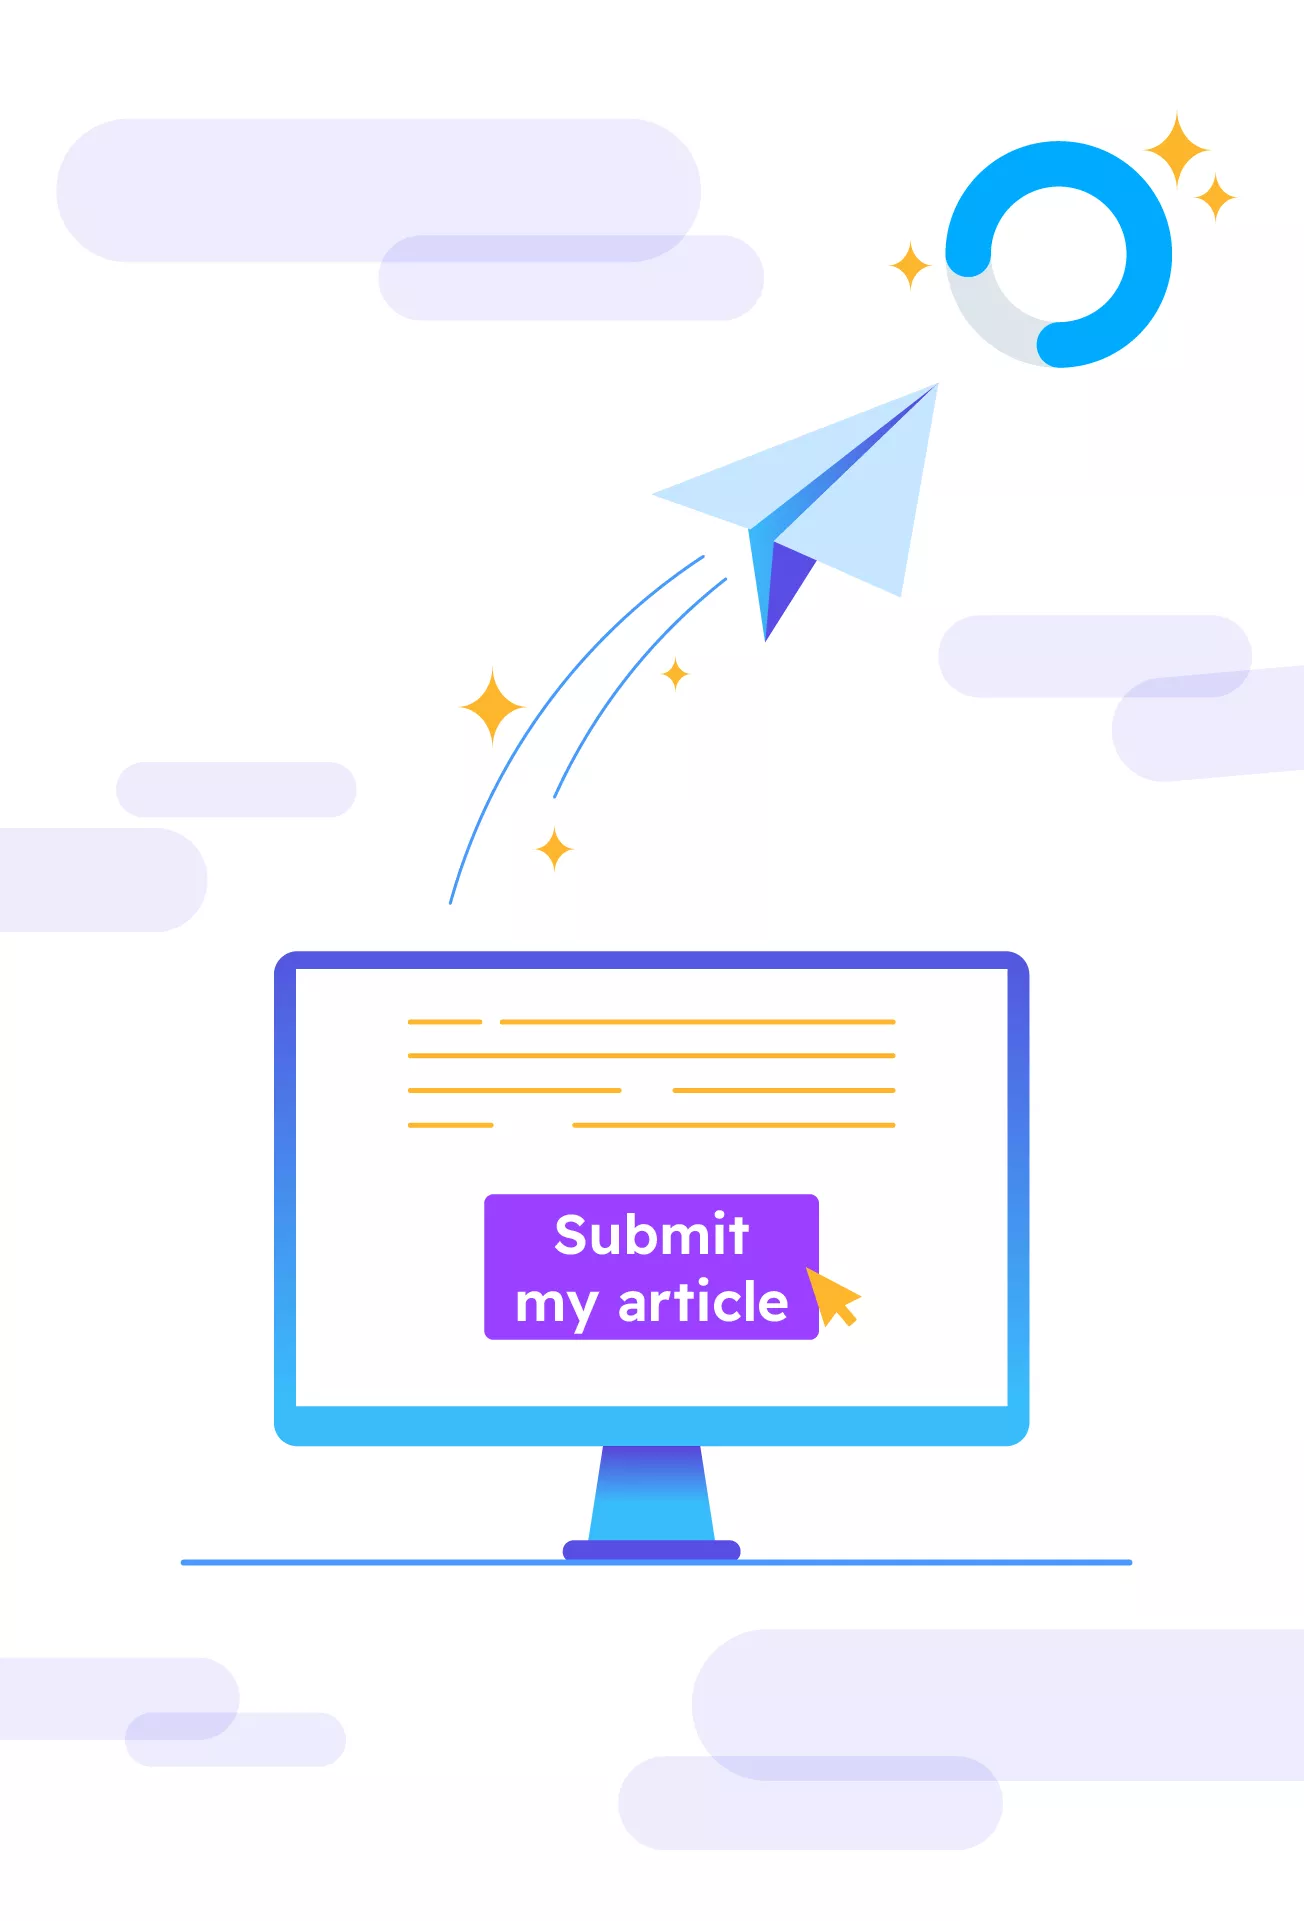 submit your article to krock.io